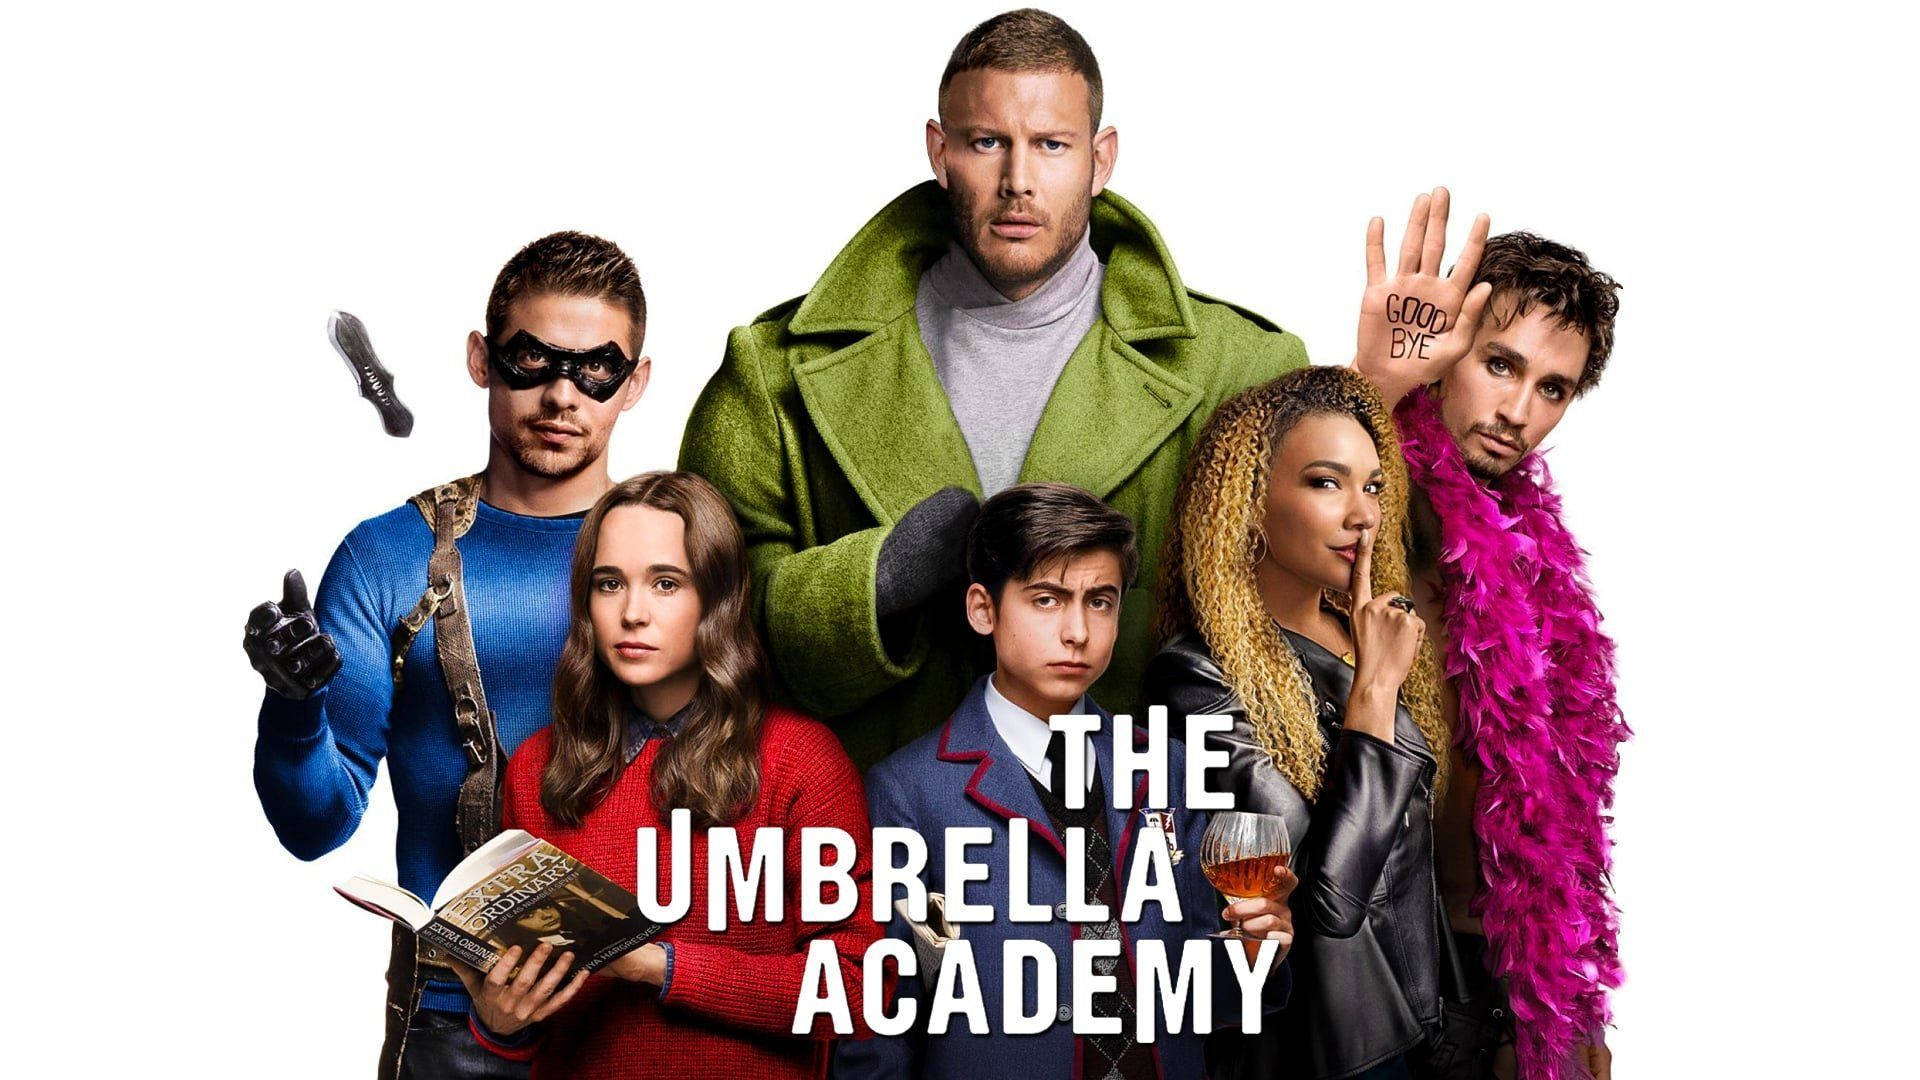 The Umbrella Academy - United Together Wallpaper